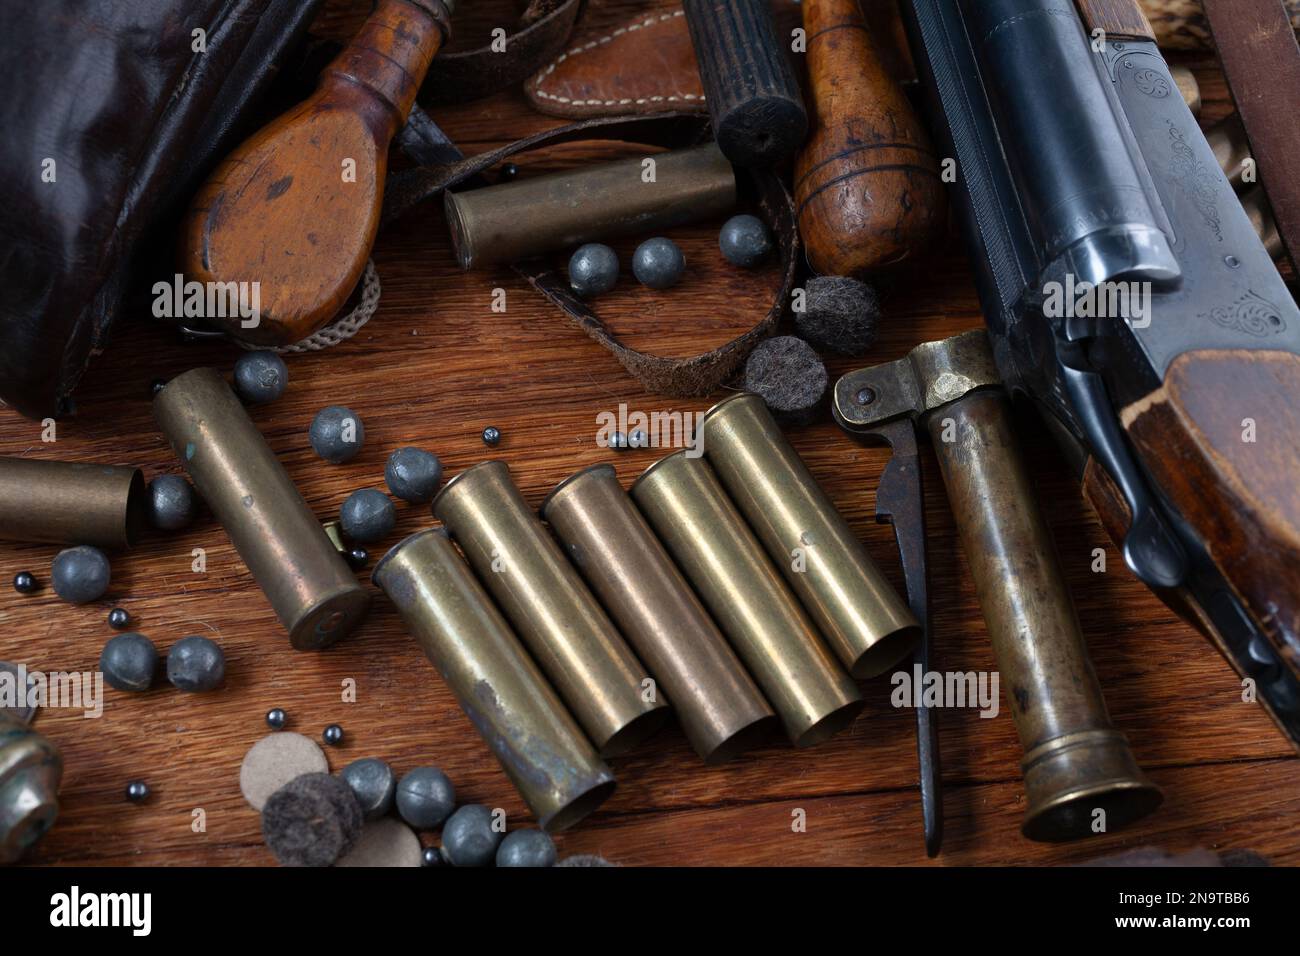 https://c8.alamy.com/comp/2N9TBB6/antique-16-gauge-break-action-smooth-bored-shotgun-with-brass-cases-and-accessories-for-cartridge-reloading-on-wooden-table-2N9TBB6.jpg